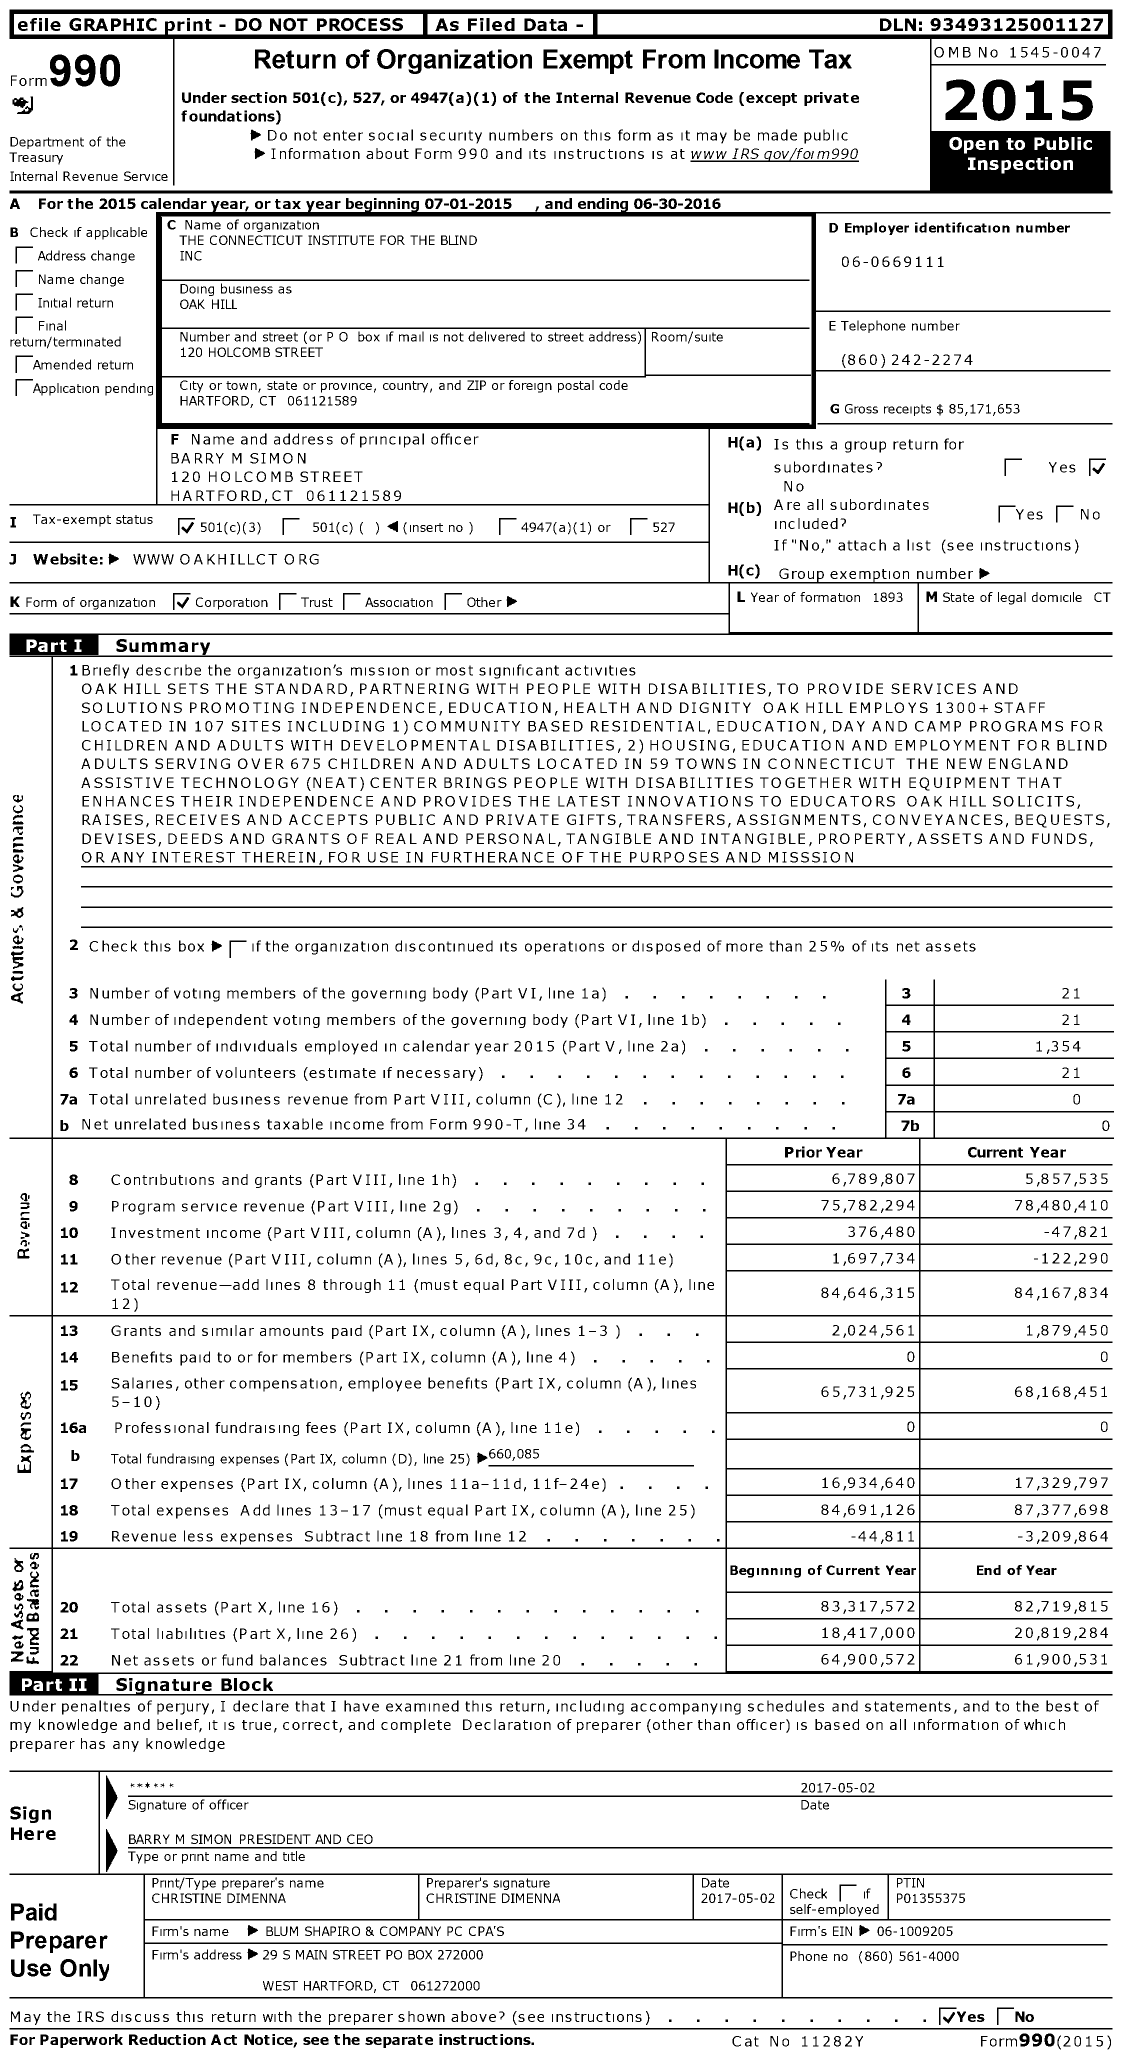 Image of first page of 2015 Form 990 for Oak Hill / The Connecticut Institute for the Blind Inc